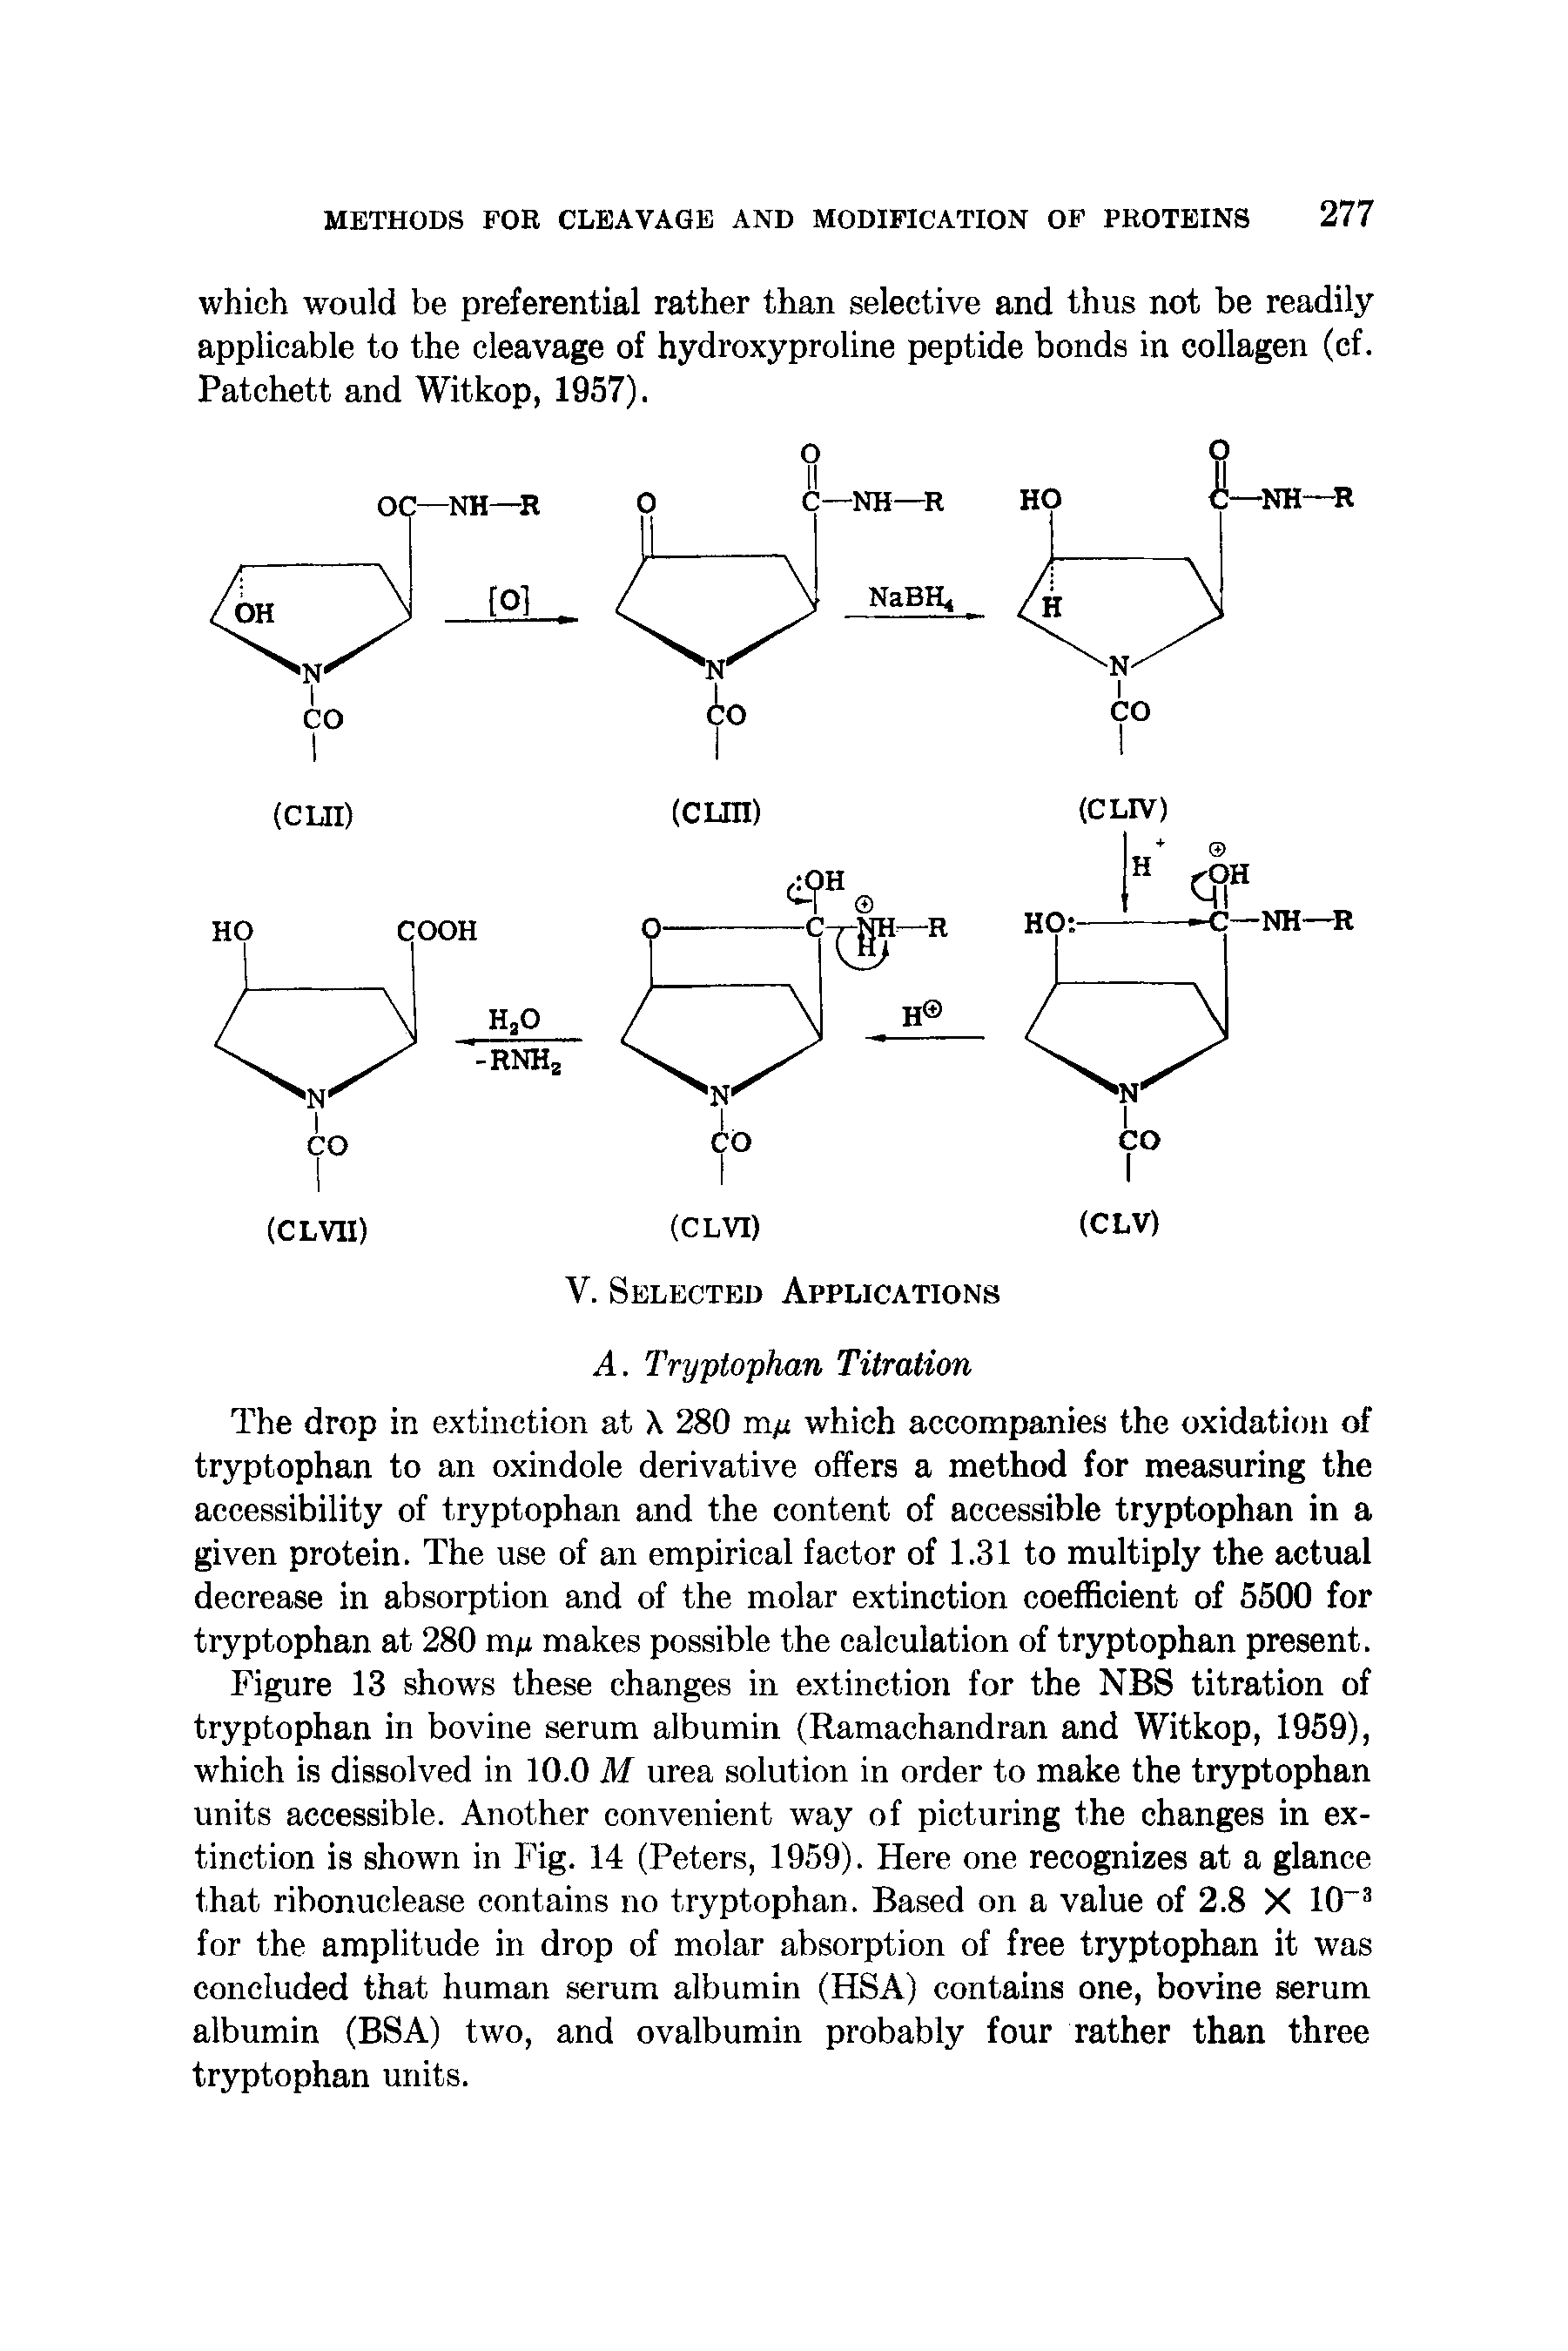 Figure 13 shows these changes in extinction for the NBS titration of tryptophan in bovine serum albumin (Ramachandran and Witkop, 1959), which is dissolved in 10.0 M urea solution in order to make the tryptophan units accessible. Another convenient way of picturing the changes in extinction is shown in Fig. 14 (Peters, 1959). Here one recognizes at a glance that ribonuclease contains no tryptophan. Based on a value of 2.8 X 10 for the amplitude in drop of molar absorption of free tryptophan it was concluded that human serum albumin (HSA) contains one, bovine serum albumin (BSA) two, and ovalbumin probably four rather than three tryptophan units.